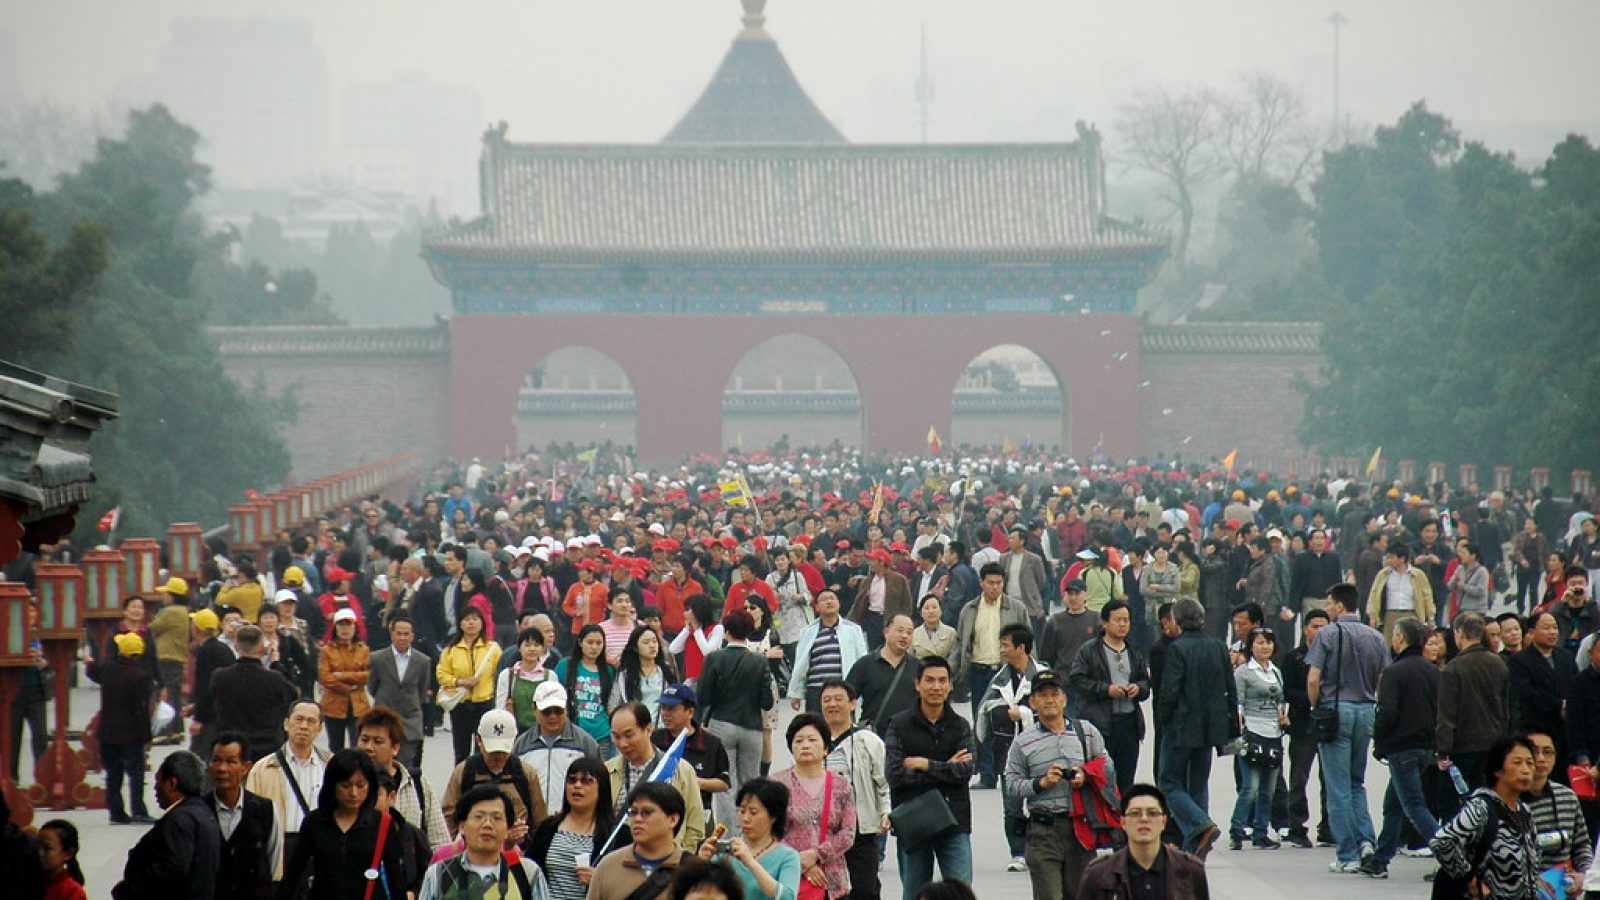 Crowd of people at the Temple of Heaven in Beijing